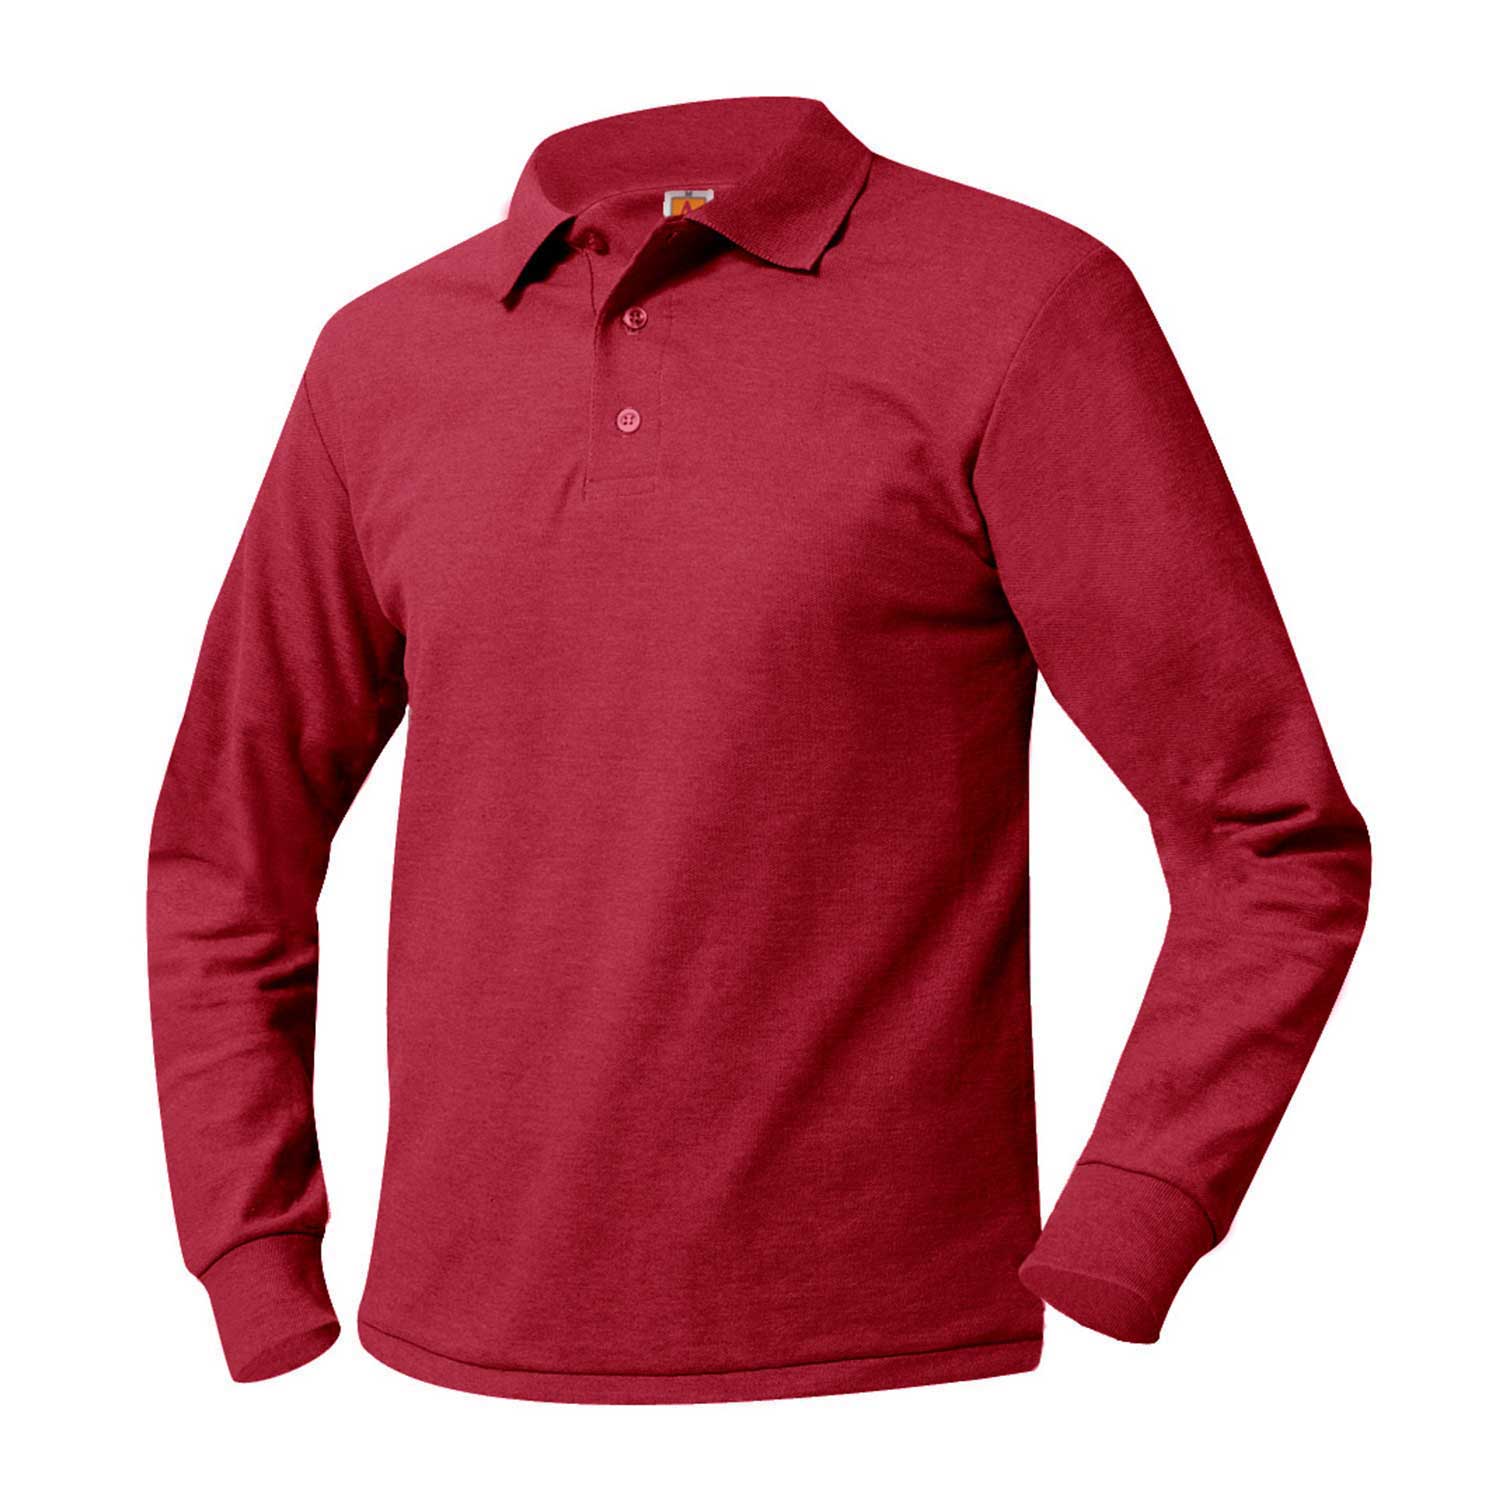 CSA LONG SLEEVE POLO SHIRTS WITH LOGO – Student Styles